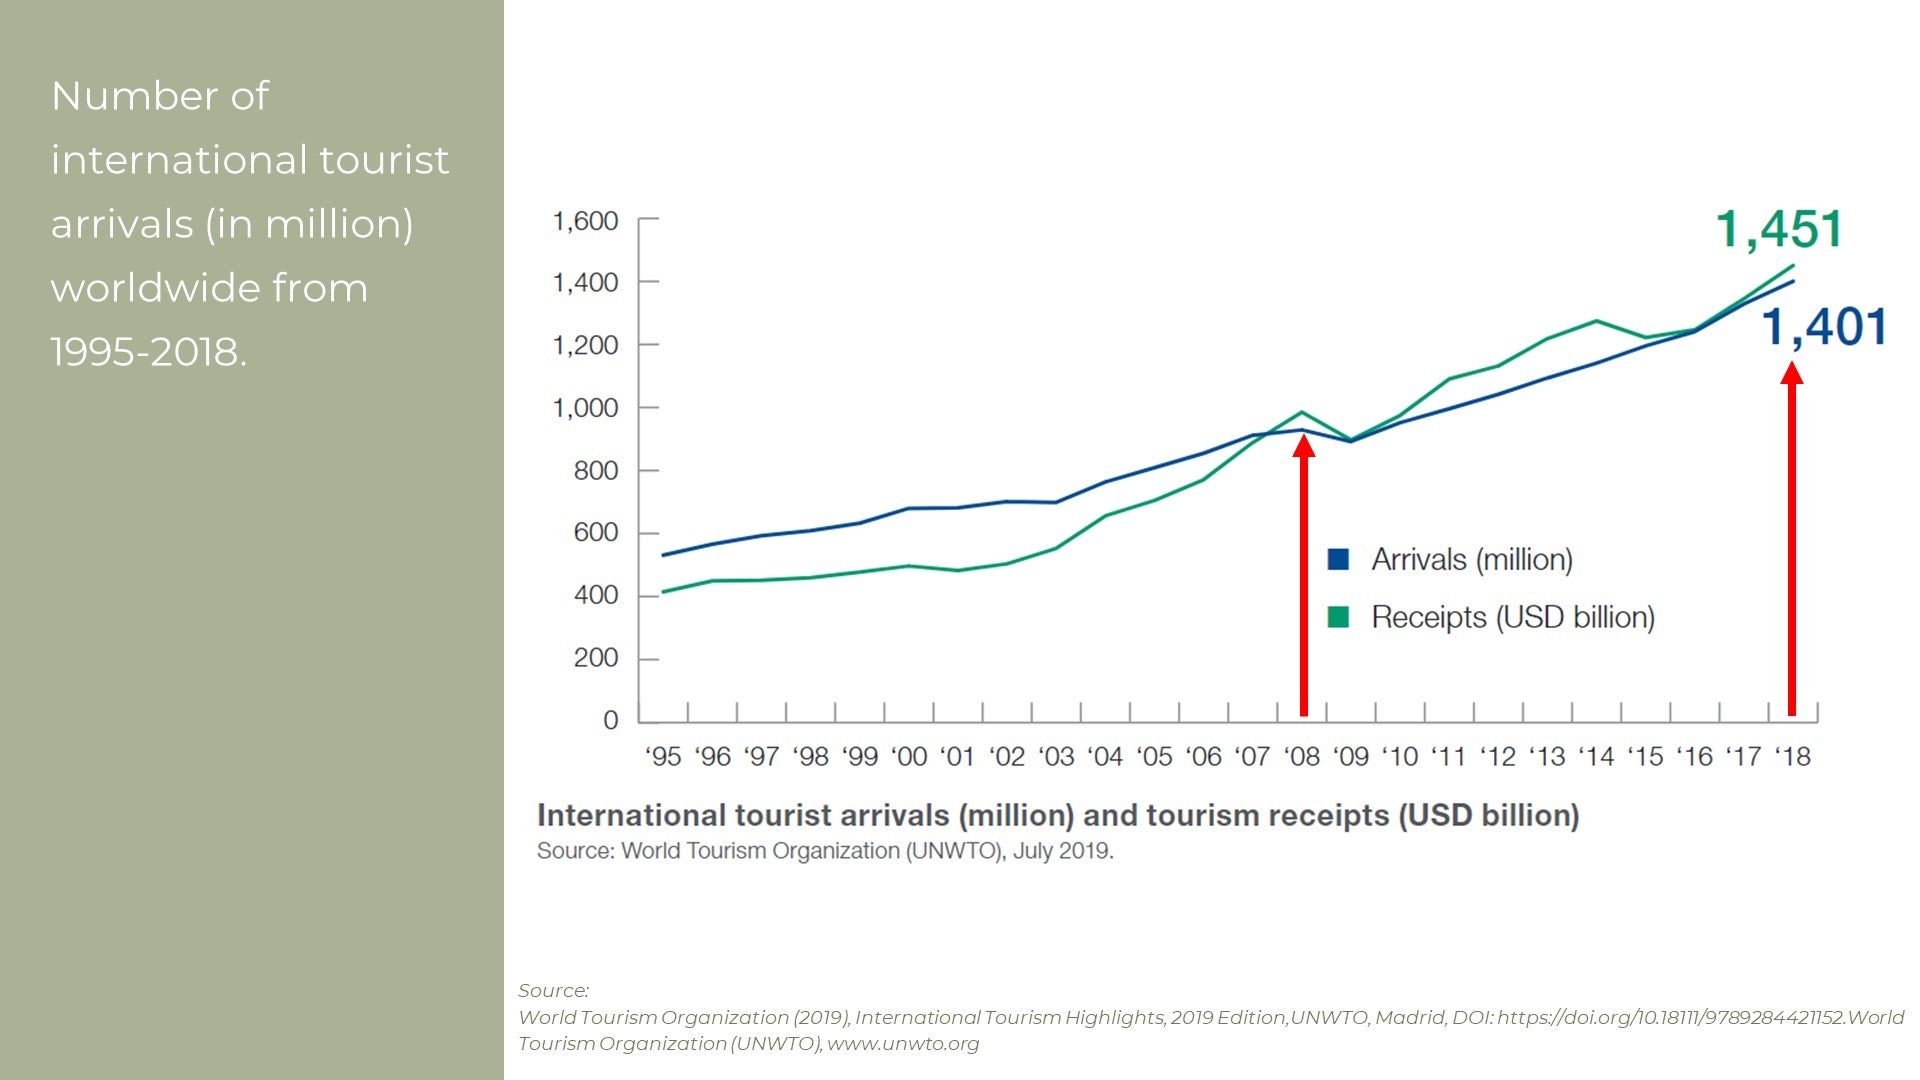 Number of international tourist arrivals in million worldwide from 1995-2018. Source: UNWTO